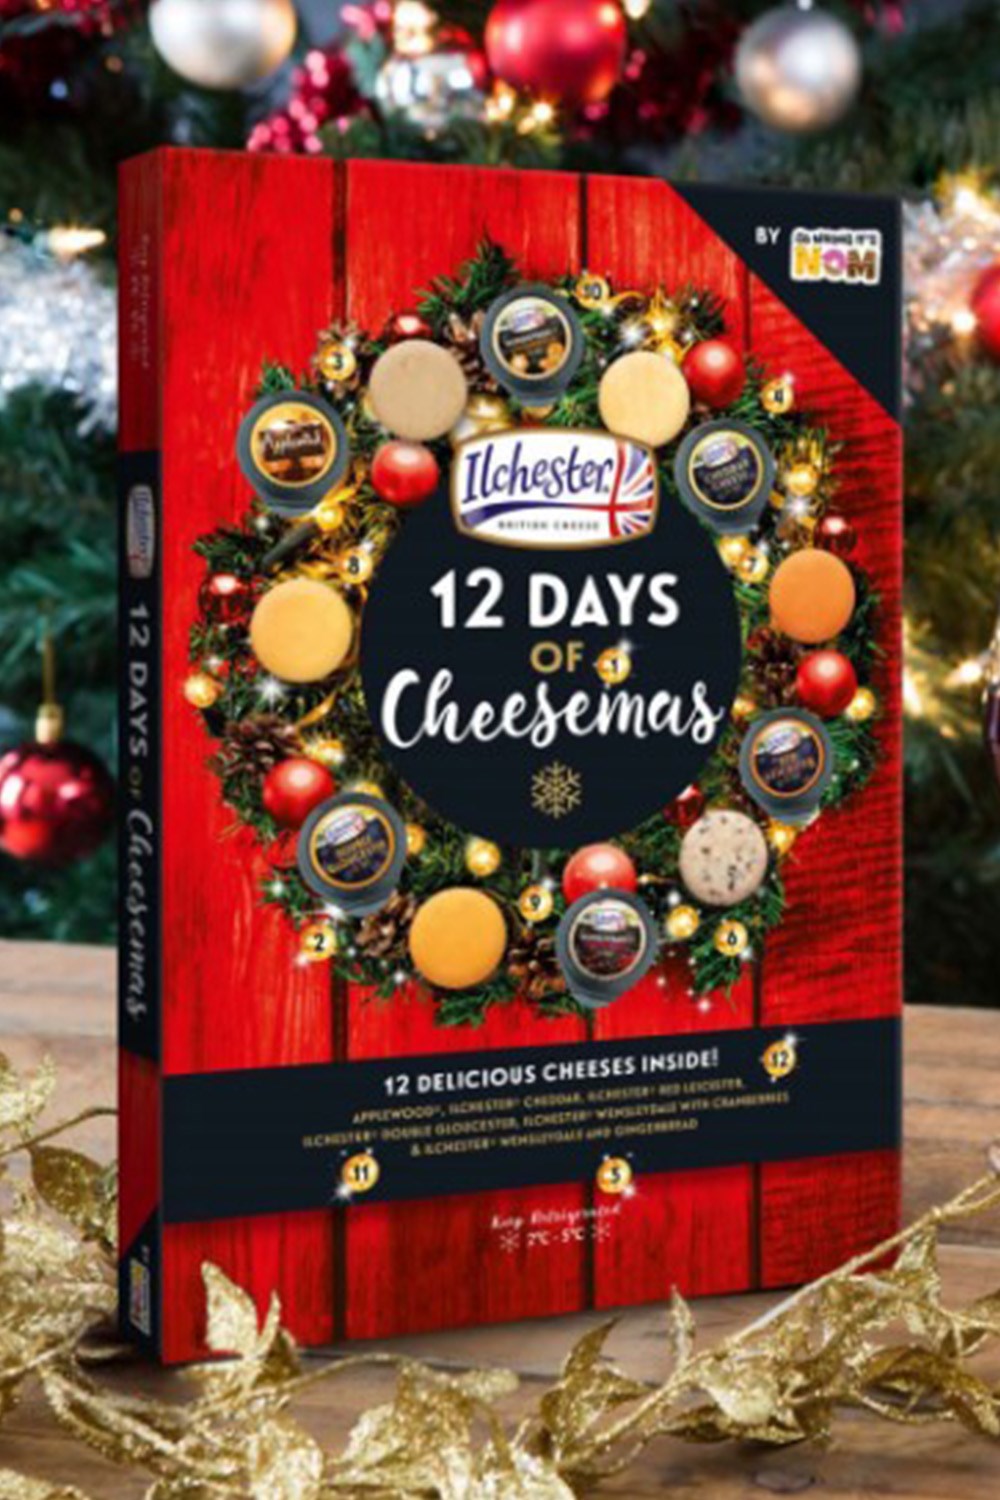 Woolworths release ‘12 days of Cheesemas’ cheese Advent calendar